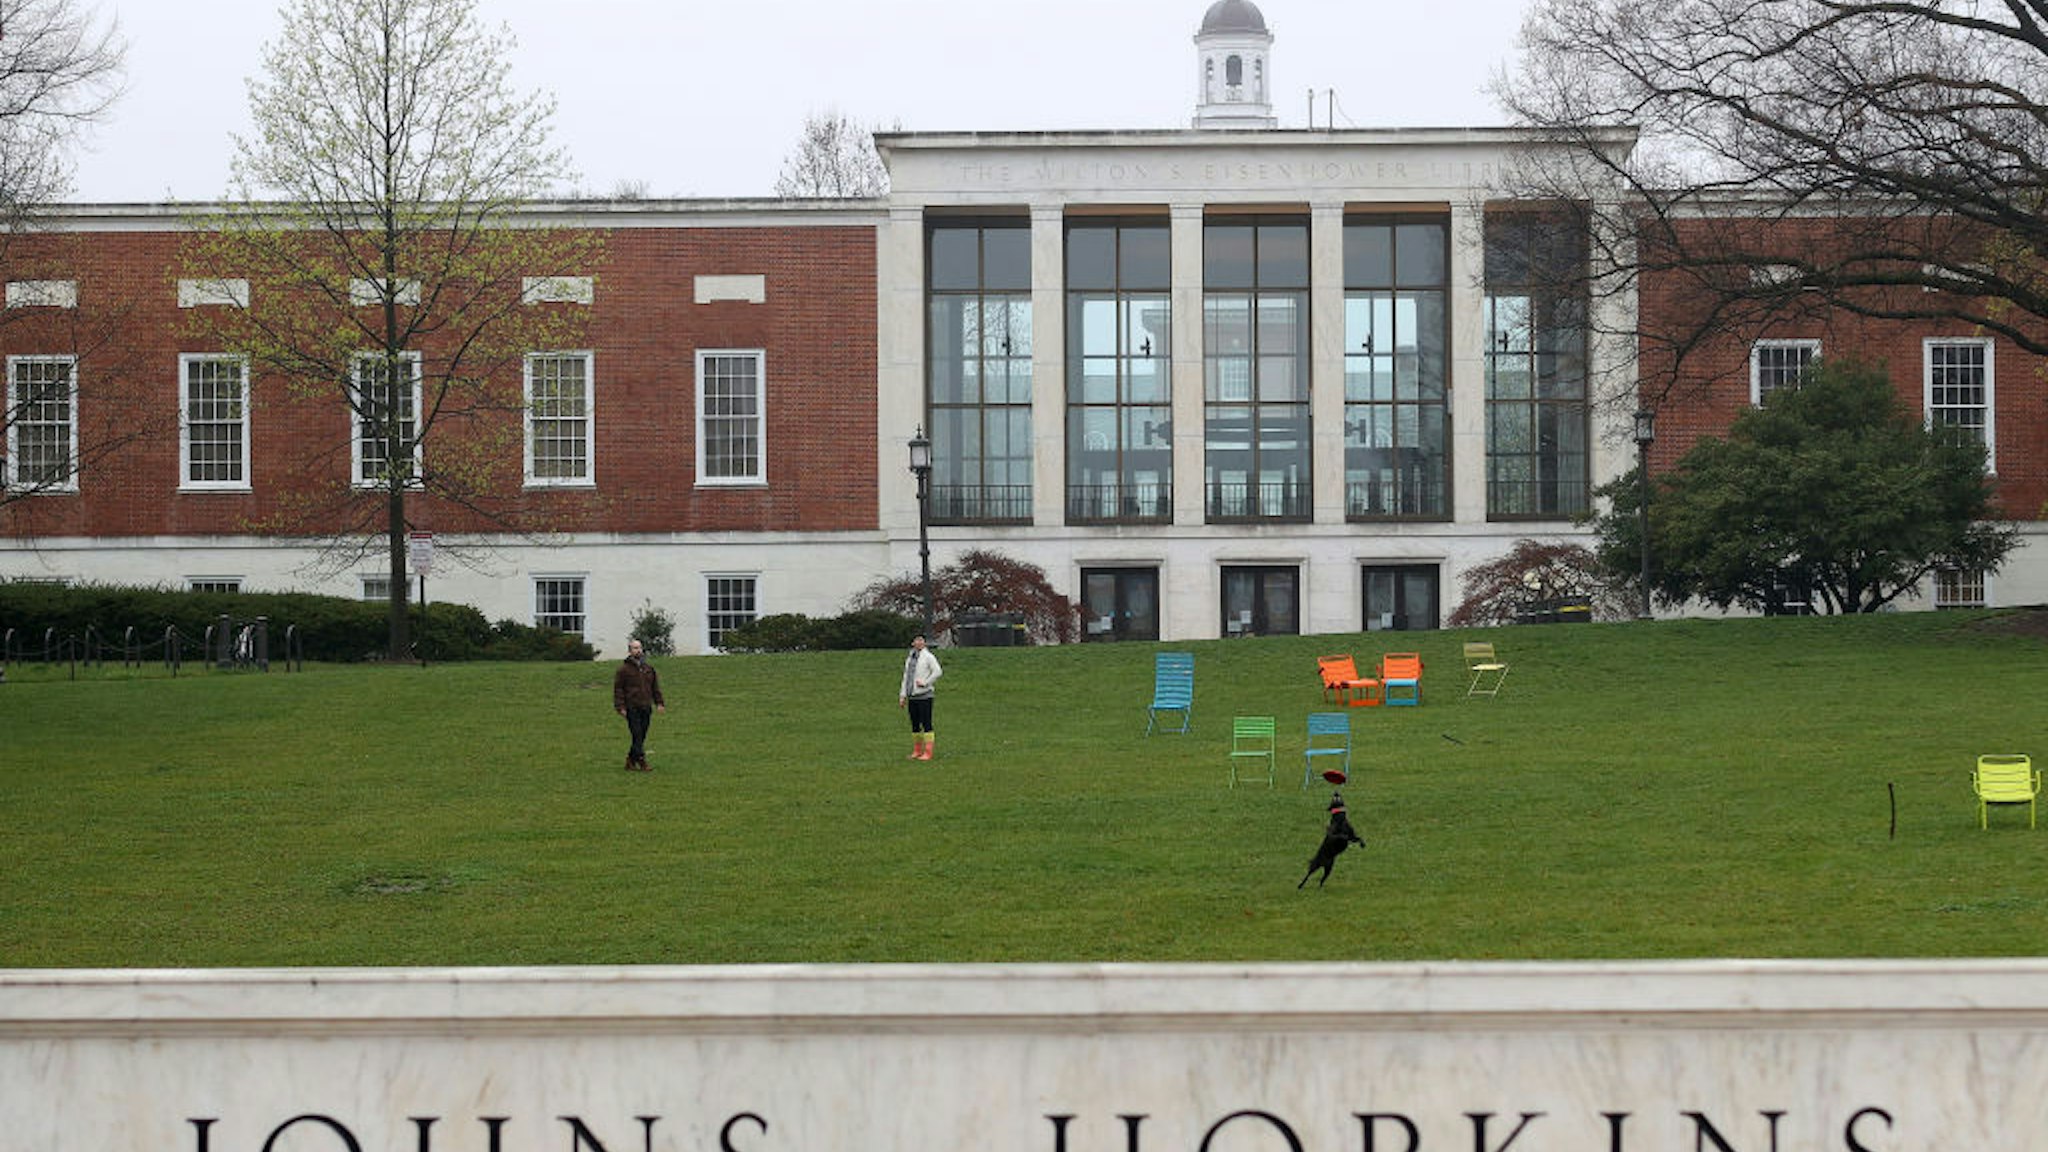 BALTIMORE, MARYLAND - MARCH 28: A couple throw a frisbee for a dog on the campus of The Johns Hopkins University on March 28, 2020 in Baltimore, Maryland. The school is shut down due to the coronavirus (COVID-19) outbreak. (Photo by Rob Carr/Getty Images)